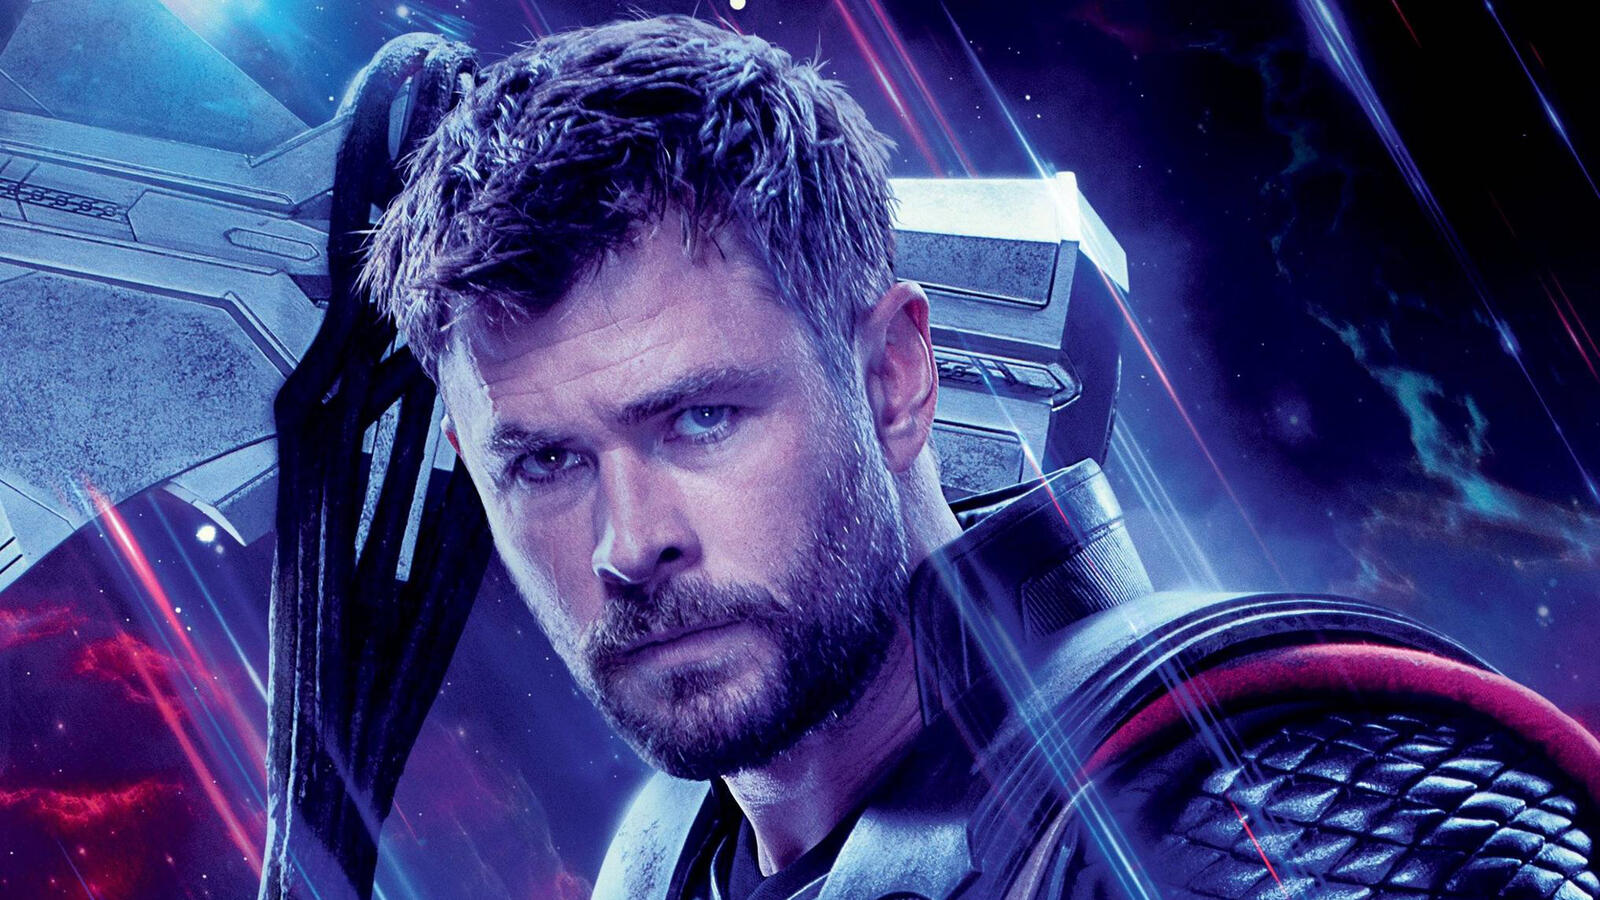 Wallpapers Avengers Endgame Thor 2019 Movies on the desktop